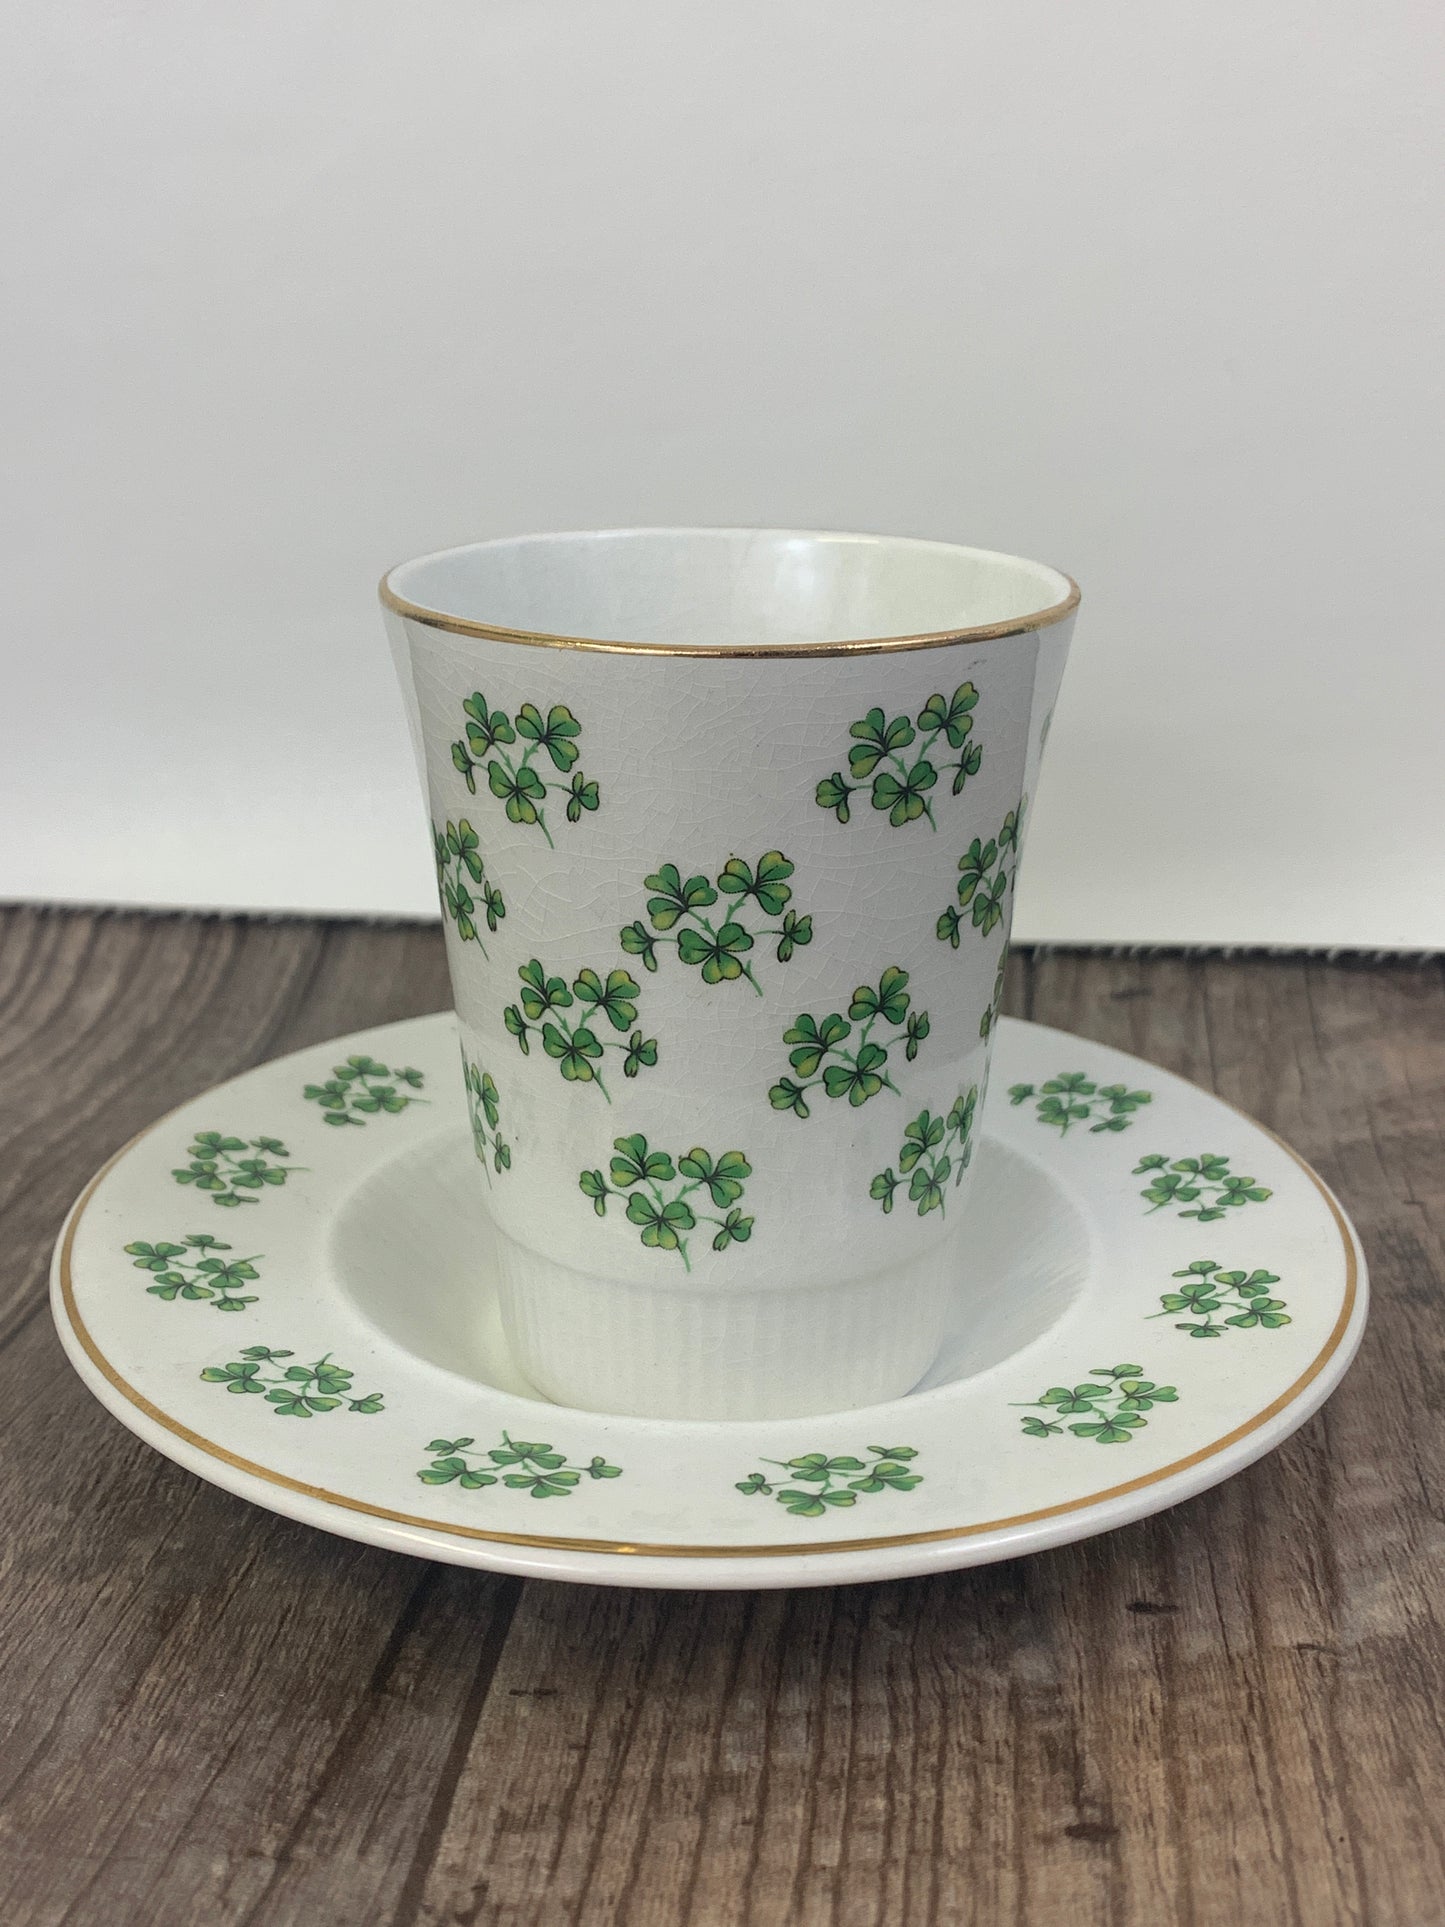 Shamrock Teacup Made in Ireland Arklow Pottery Patricia Pattern Vintage Teacup